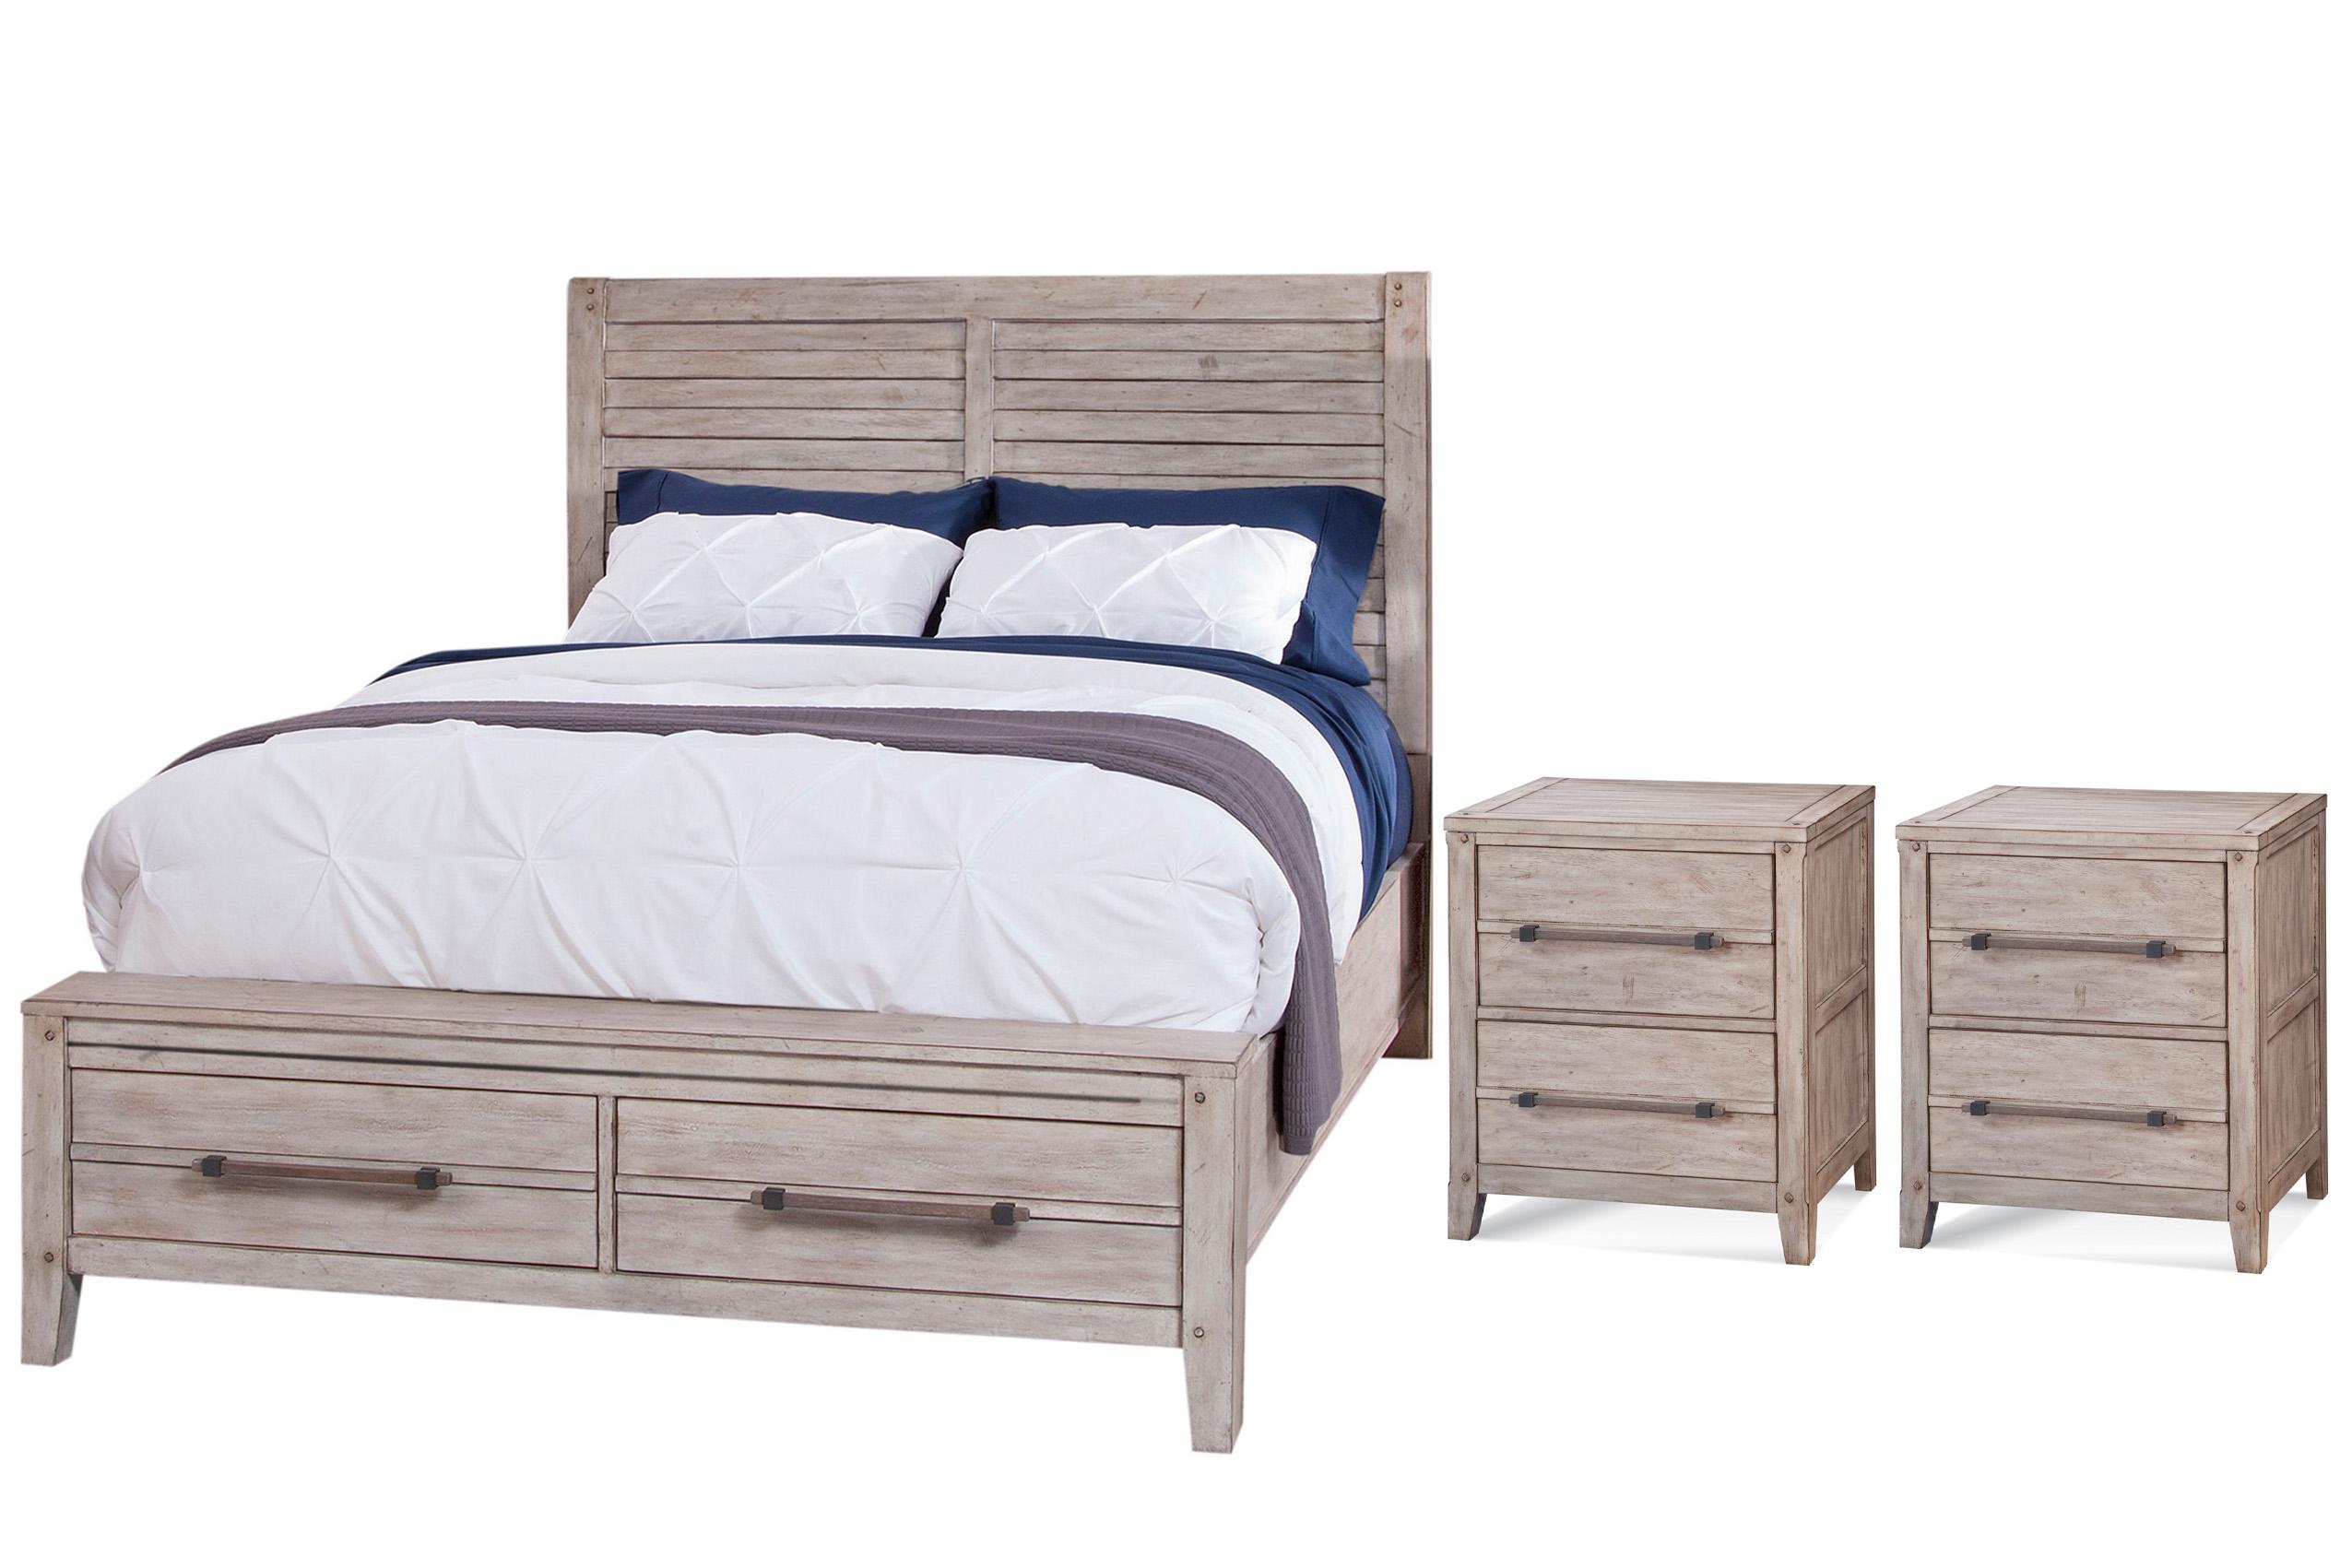 Classic, Traditional Panel Bedroom Set AURORA 2810-66PSB 2810-66PSB-2810-420-2N-3PC in whitewash 